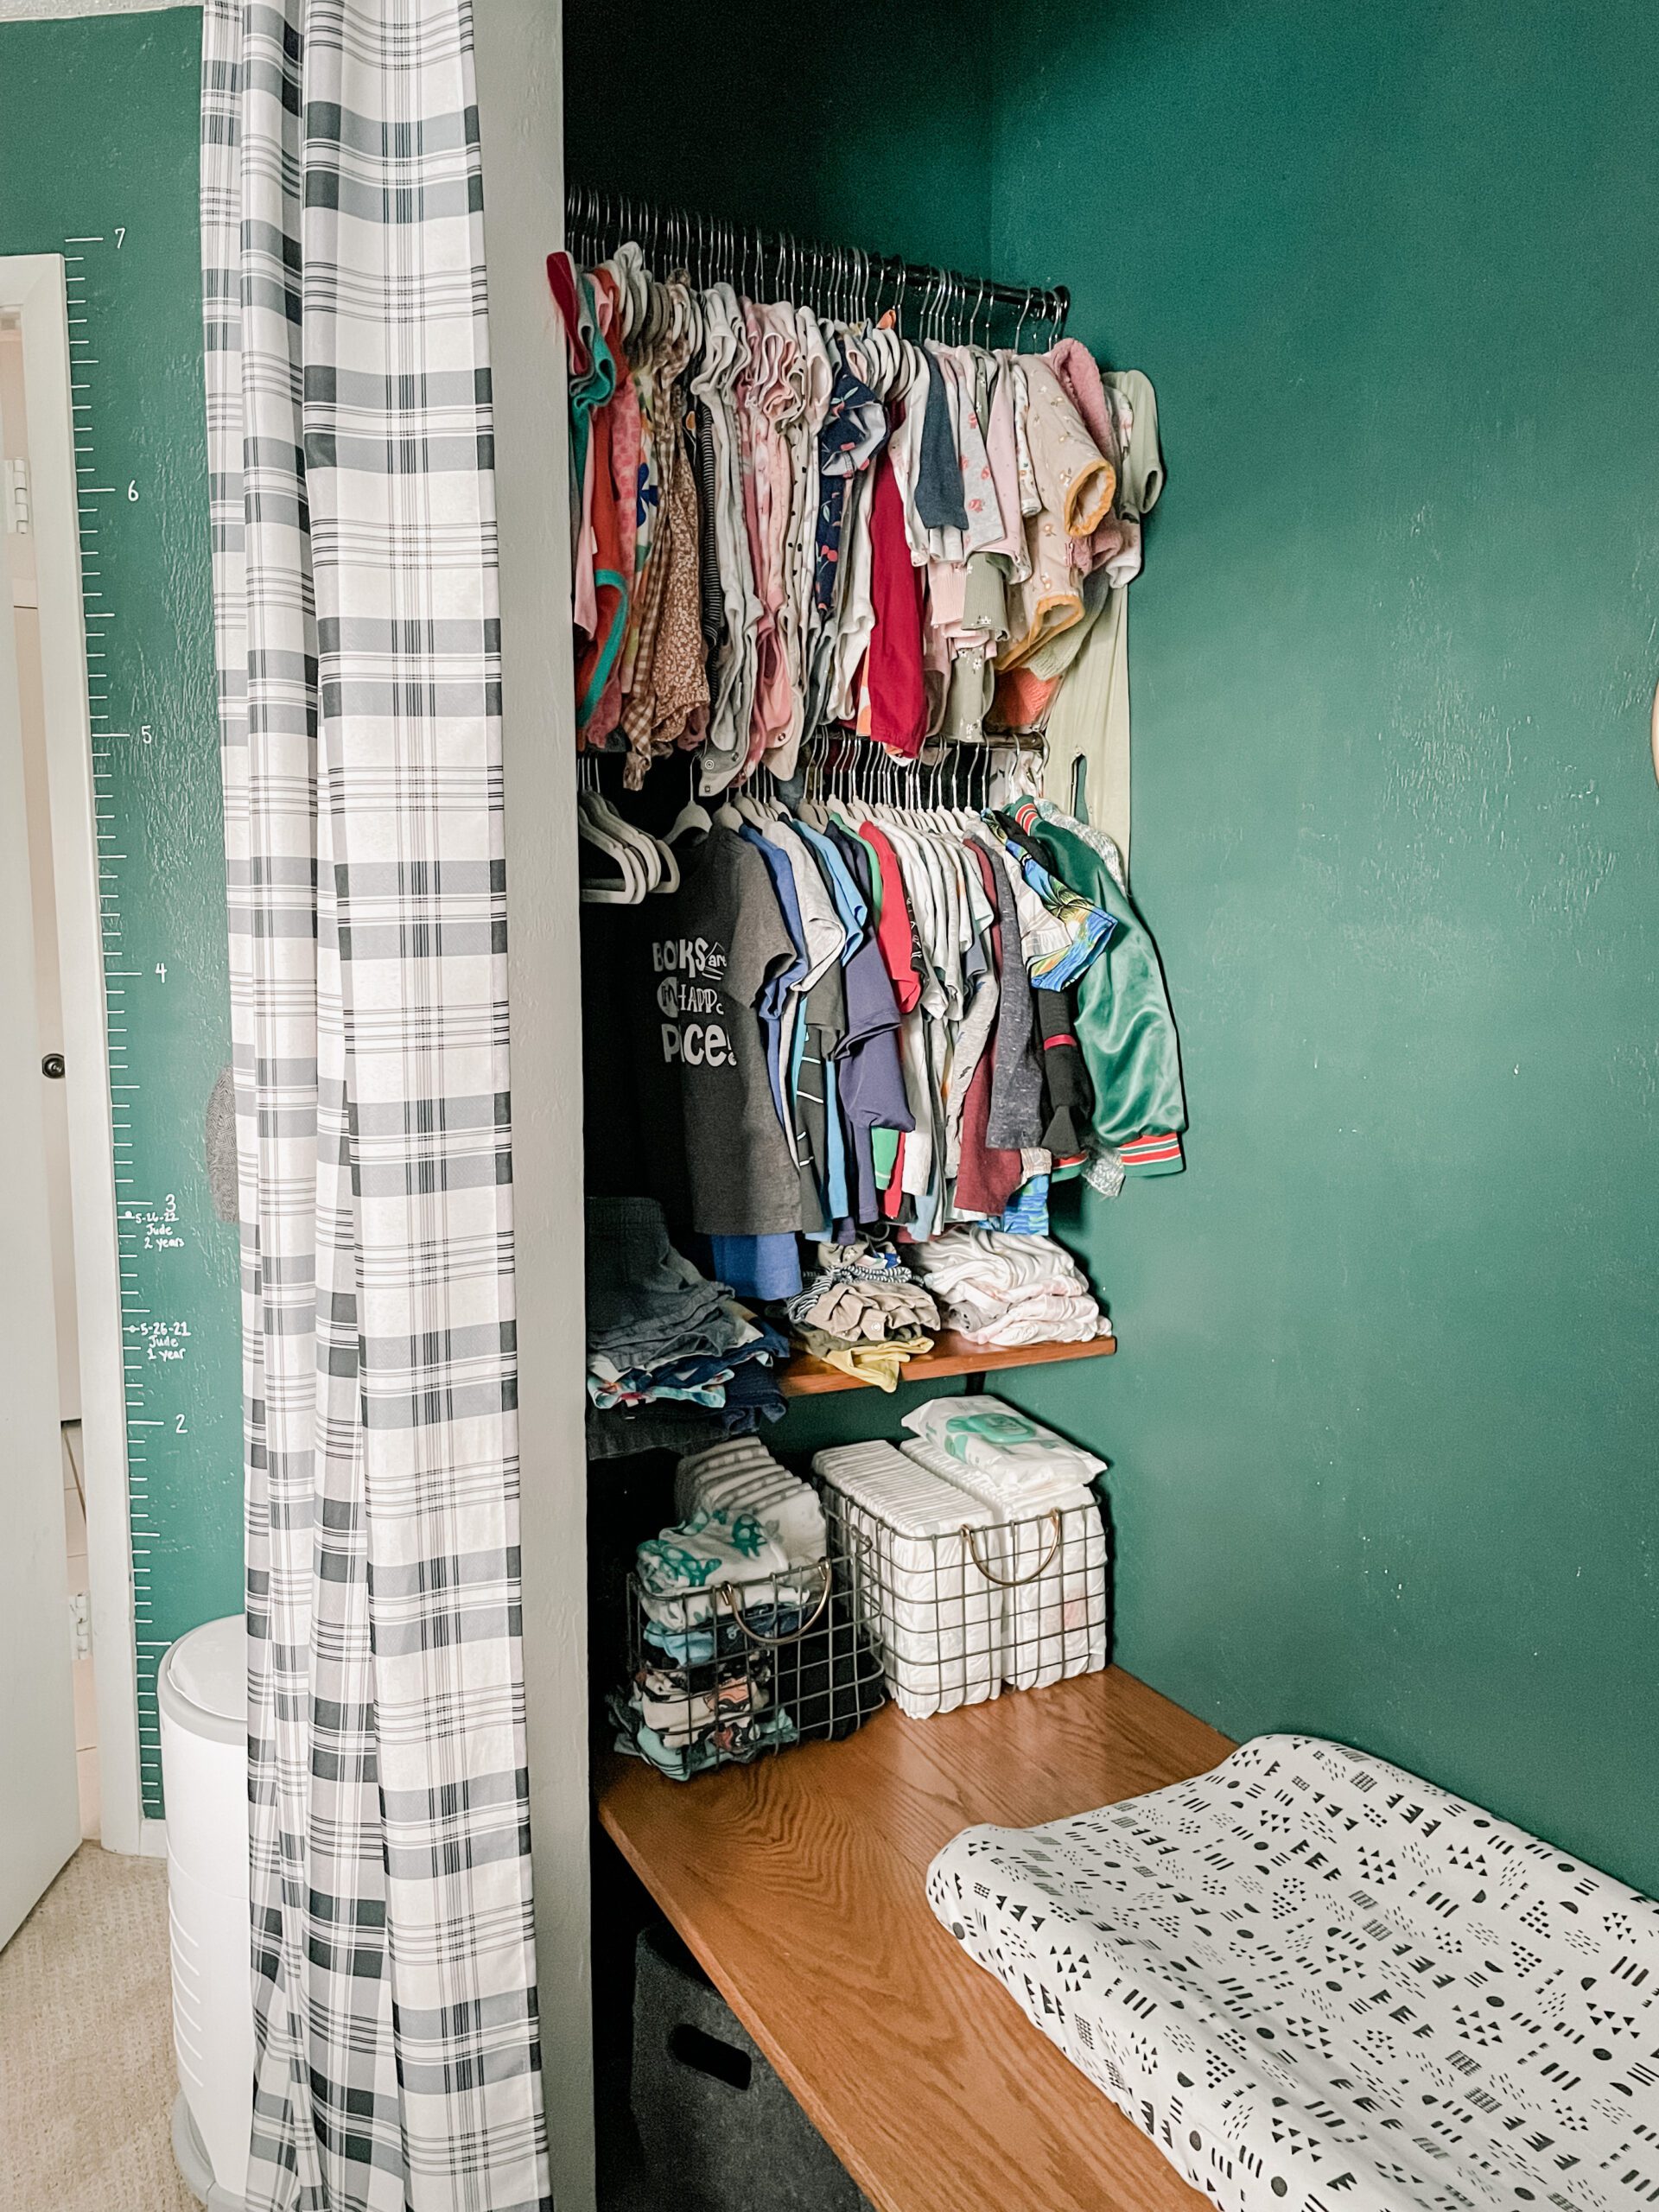 Image of inside corner of a closet. Two tension rods hold children's clothing. Baskets filled with diapers. Area sectioned off with a black and white plaid curtain